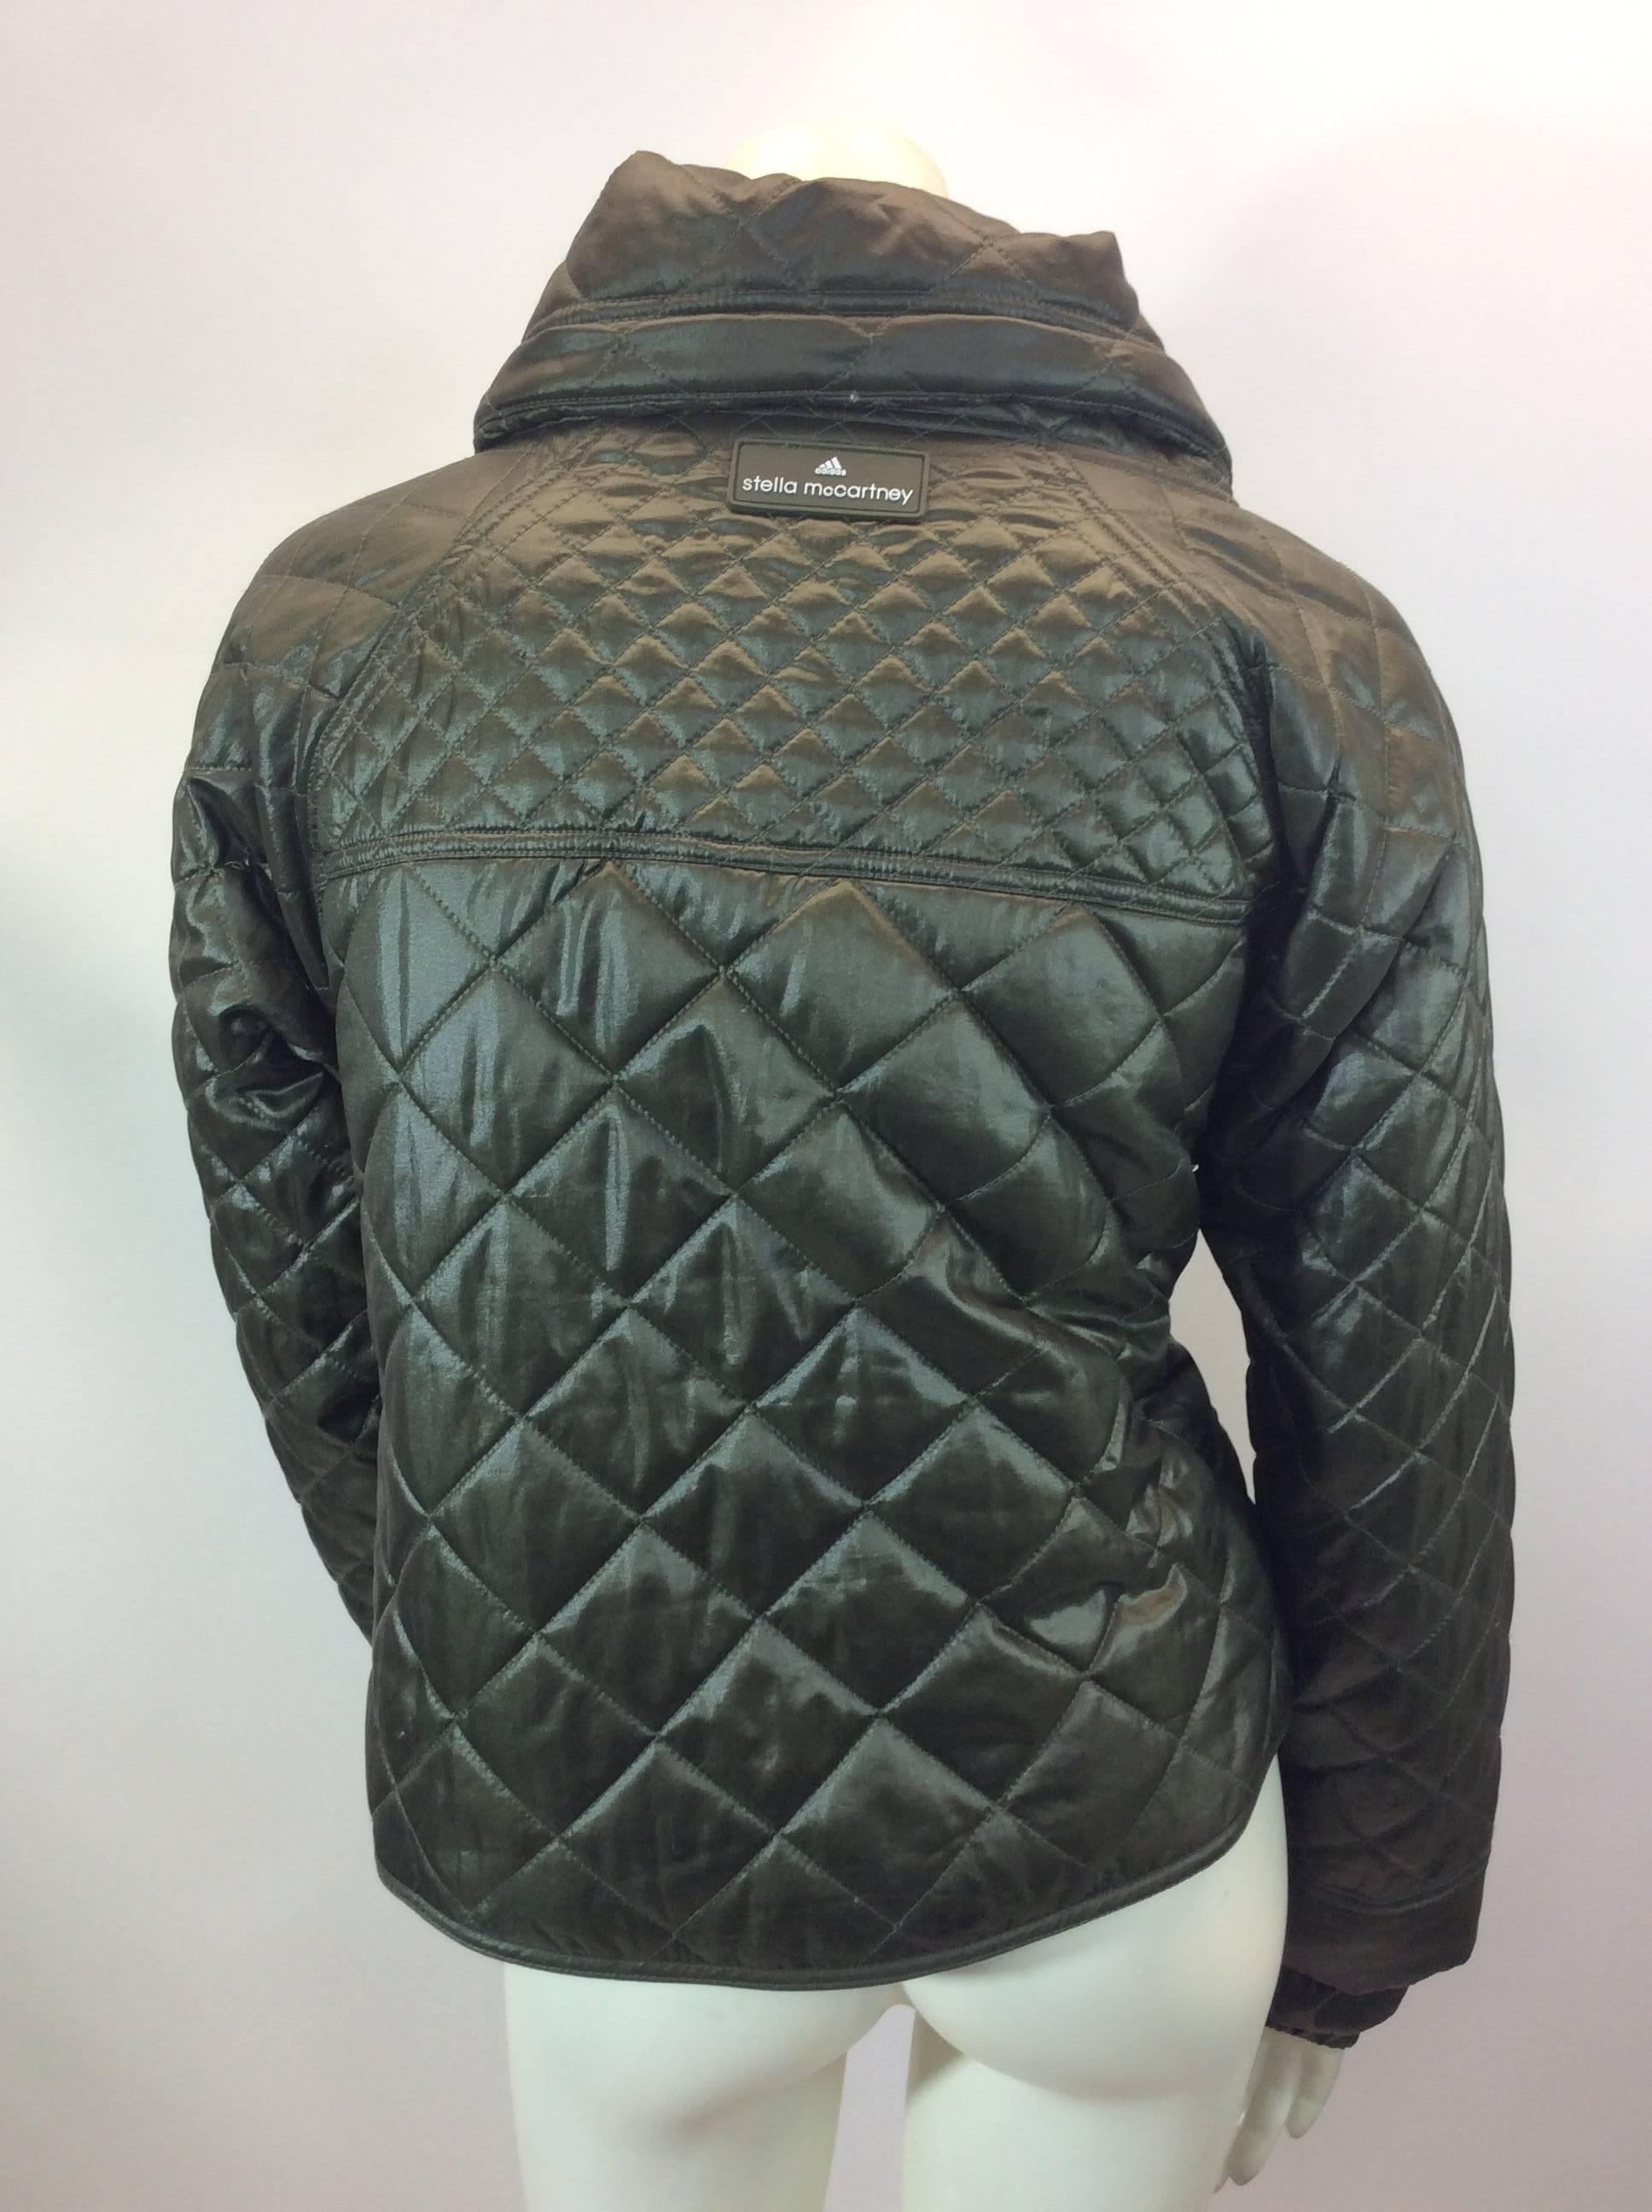 Stella McCartney Green Quilted Cropped Coat In Excellent Condition For Sale In Narberth, PA